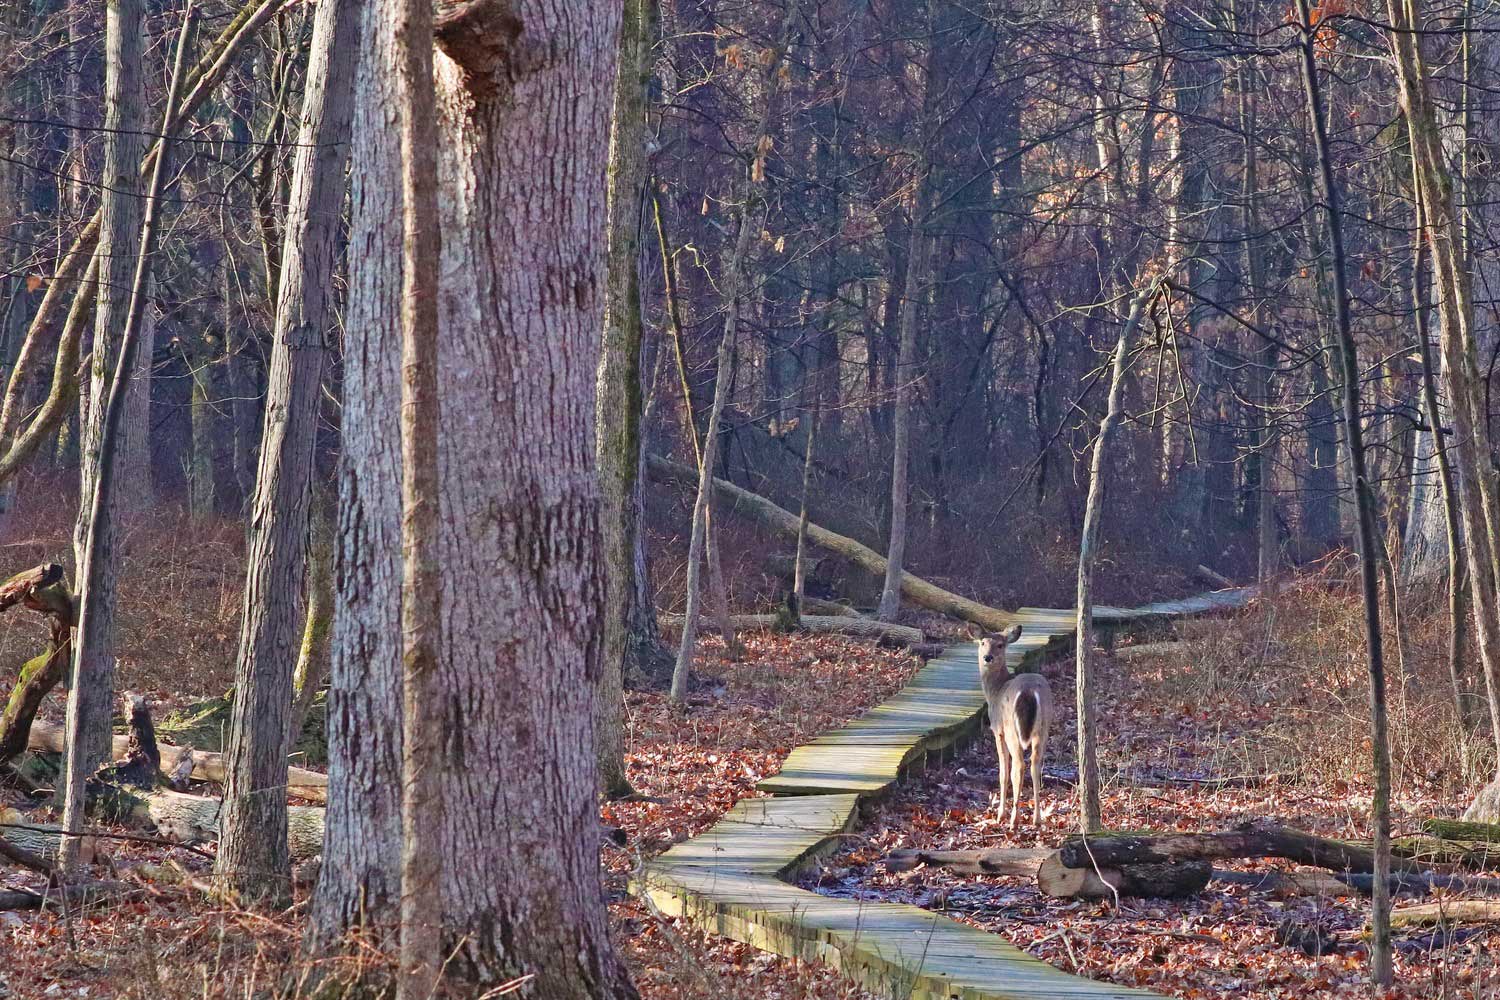 A white-tailed deer standing next to a wooden boardwalk in a forest of bare trees after all the leaves have fallen.